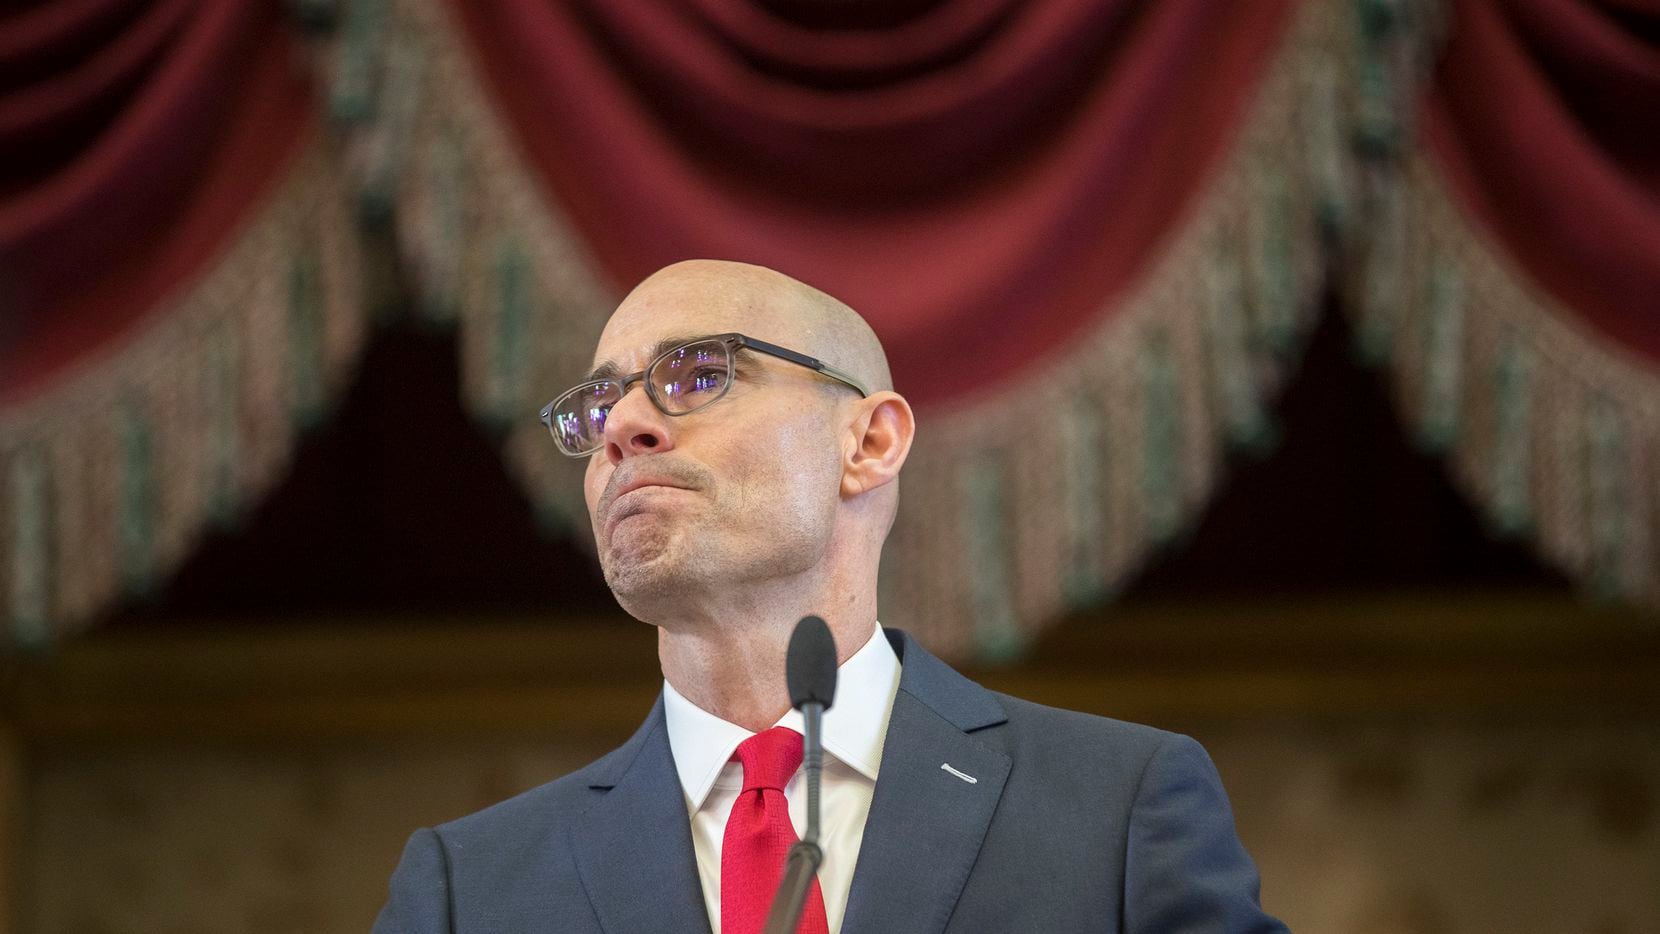 No one has filed paperwork to run for Texas House speaker. The seat is opening up with the retirement of Dennis Bonnen, whose reputation suffered after disclosure of a secret, bombshell-loaded recording of a meeting with Empower Texans leader Michael Quinn Sullivan.